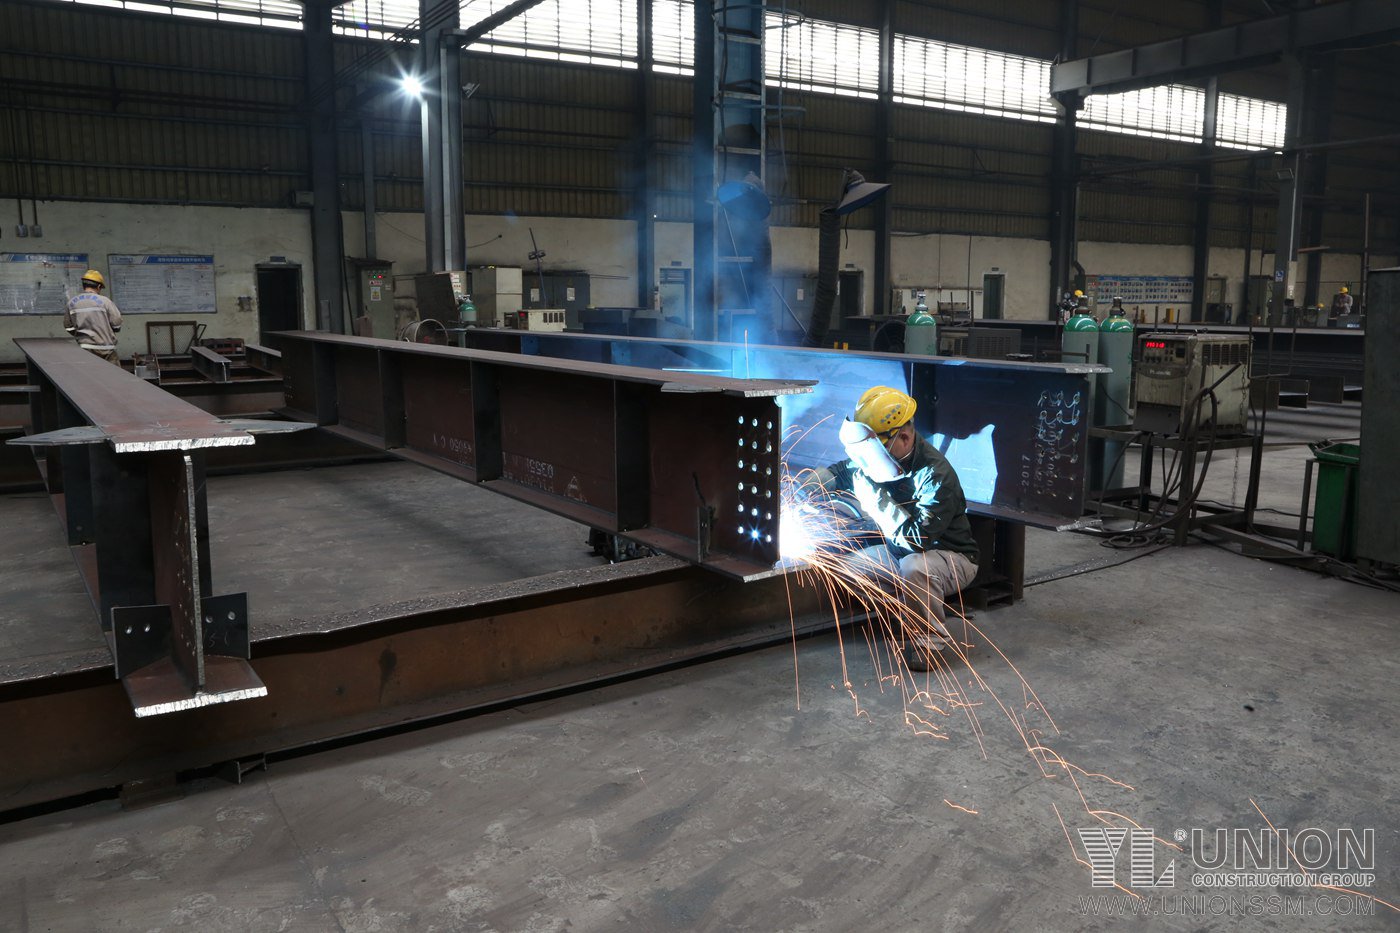 Hot Rolled / Built-up H-shapes Steel Columns and Beams Fabrication